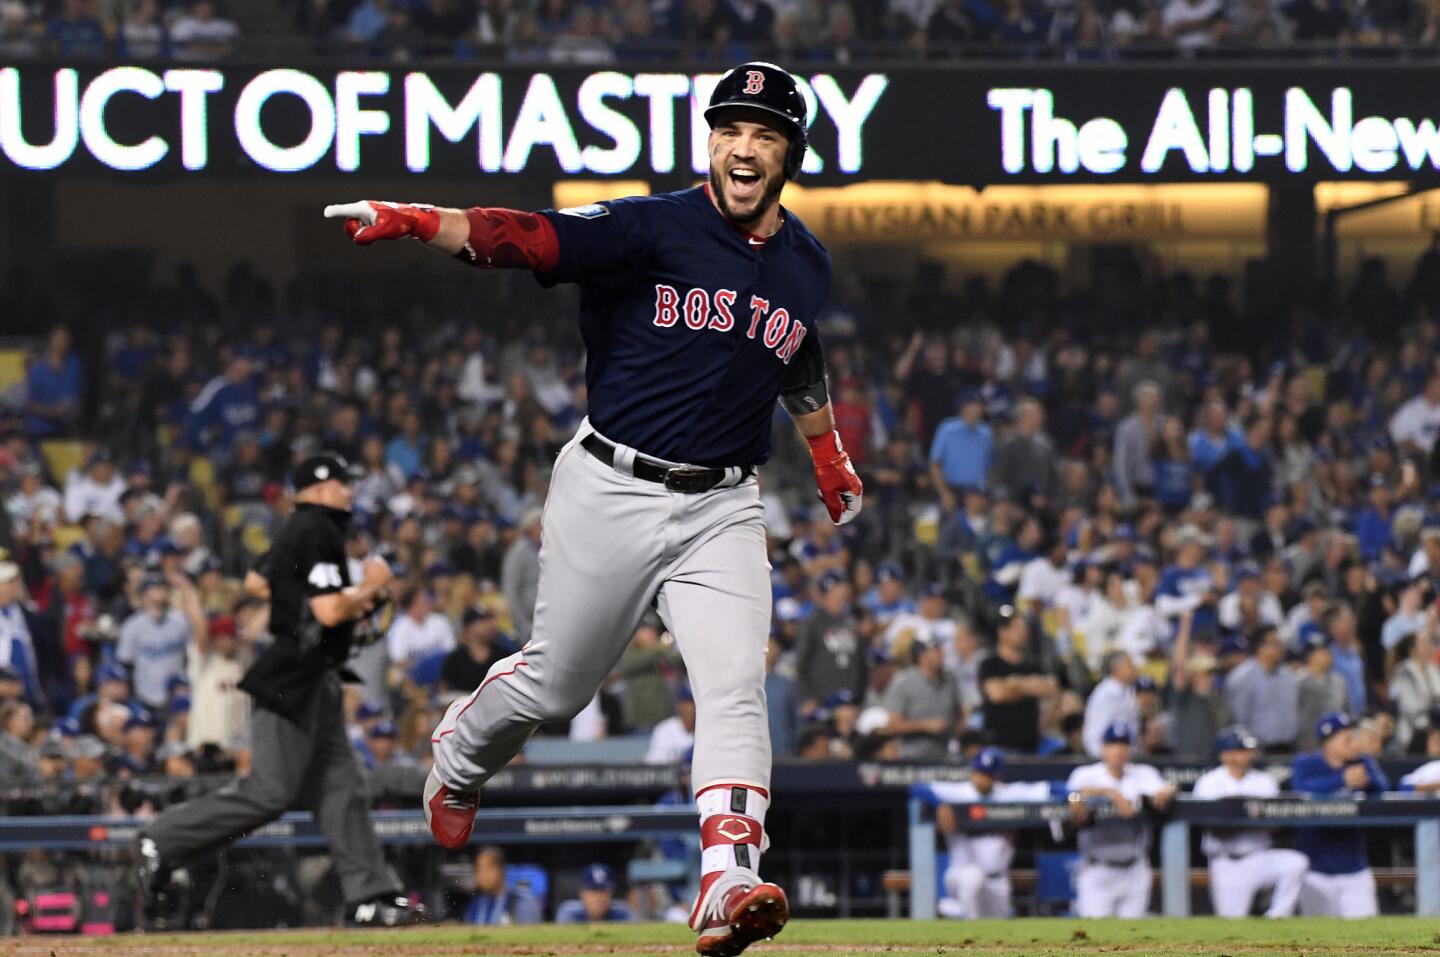 Red Sox first baseman Steve Pearce celebrates his second home run of the game against the Dodgers during the eighth inning.